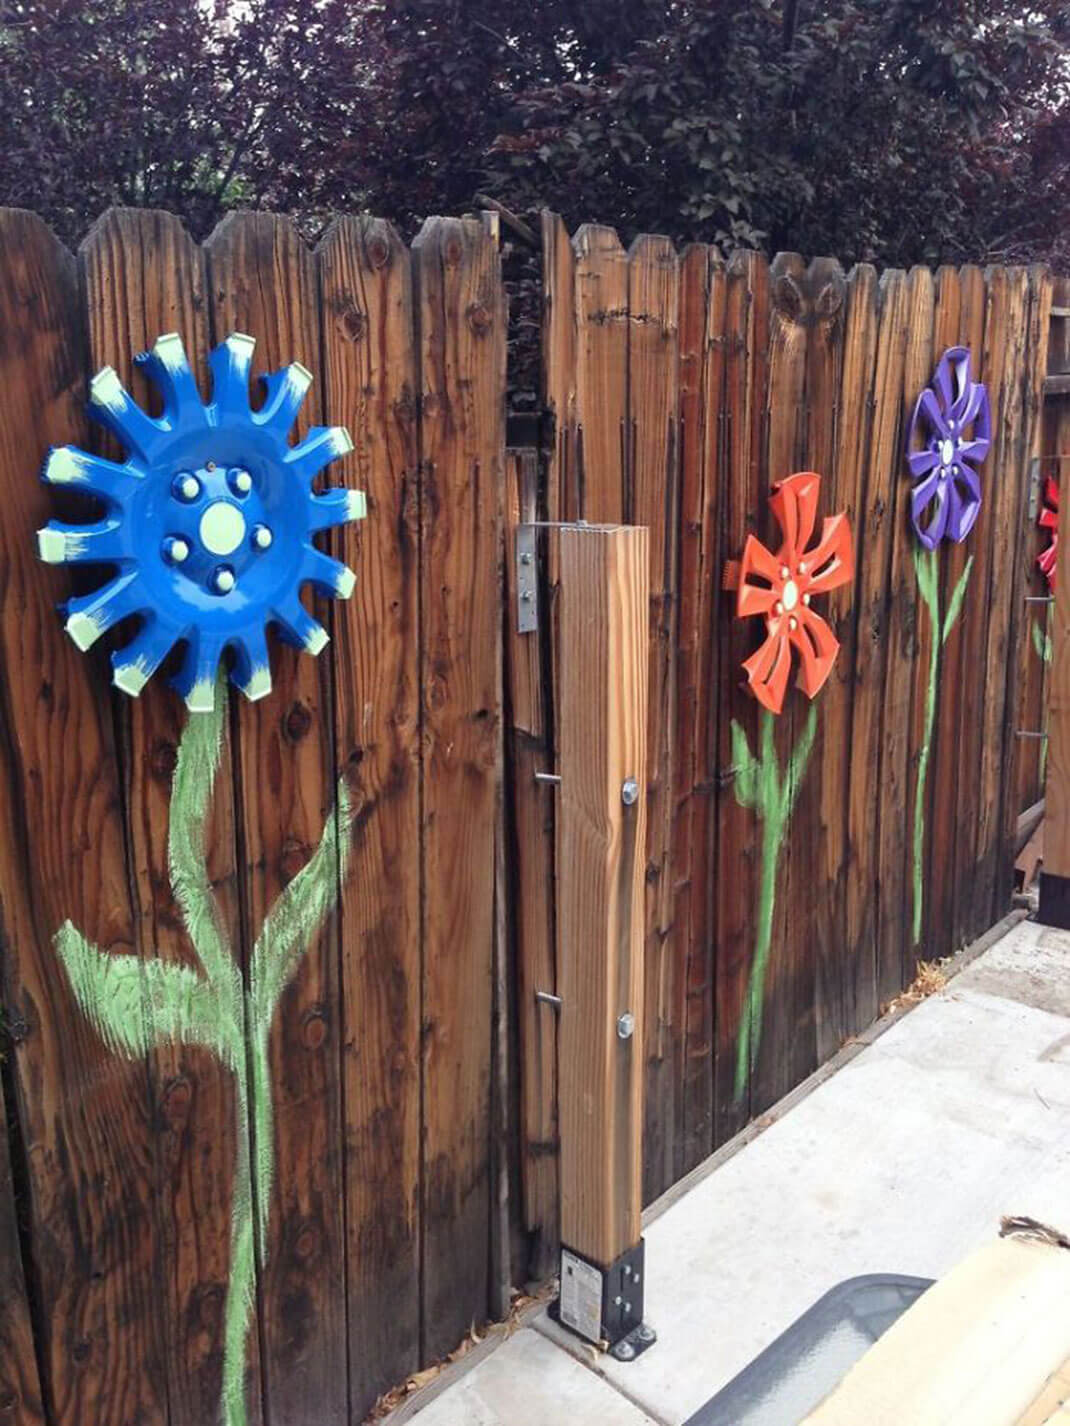 Cute Flowers made of Car Hubcaps